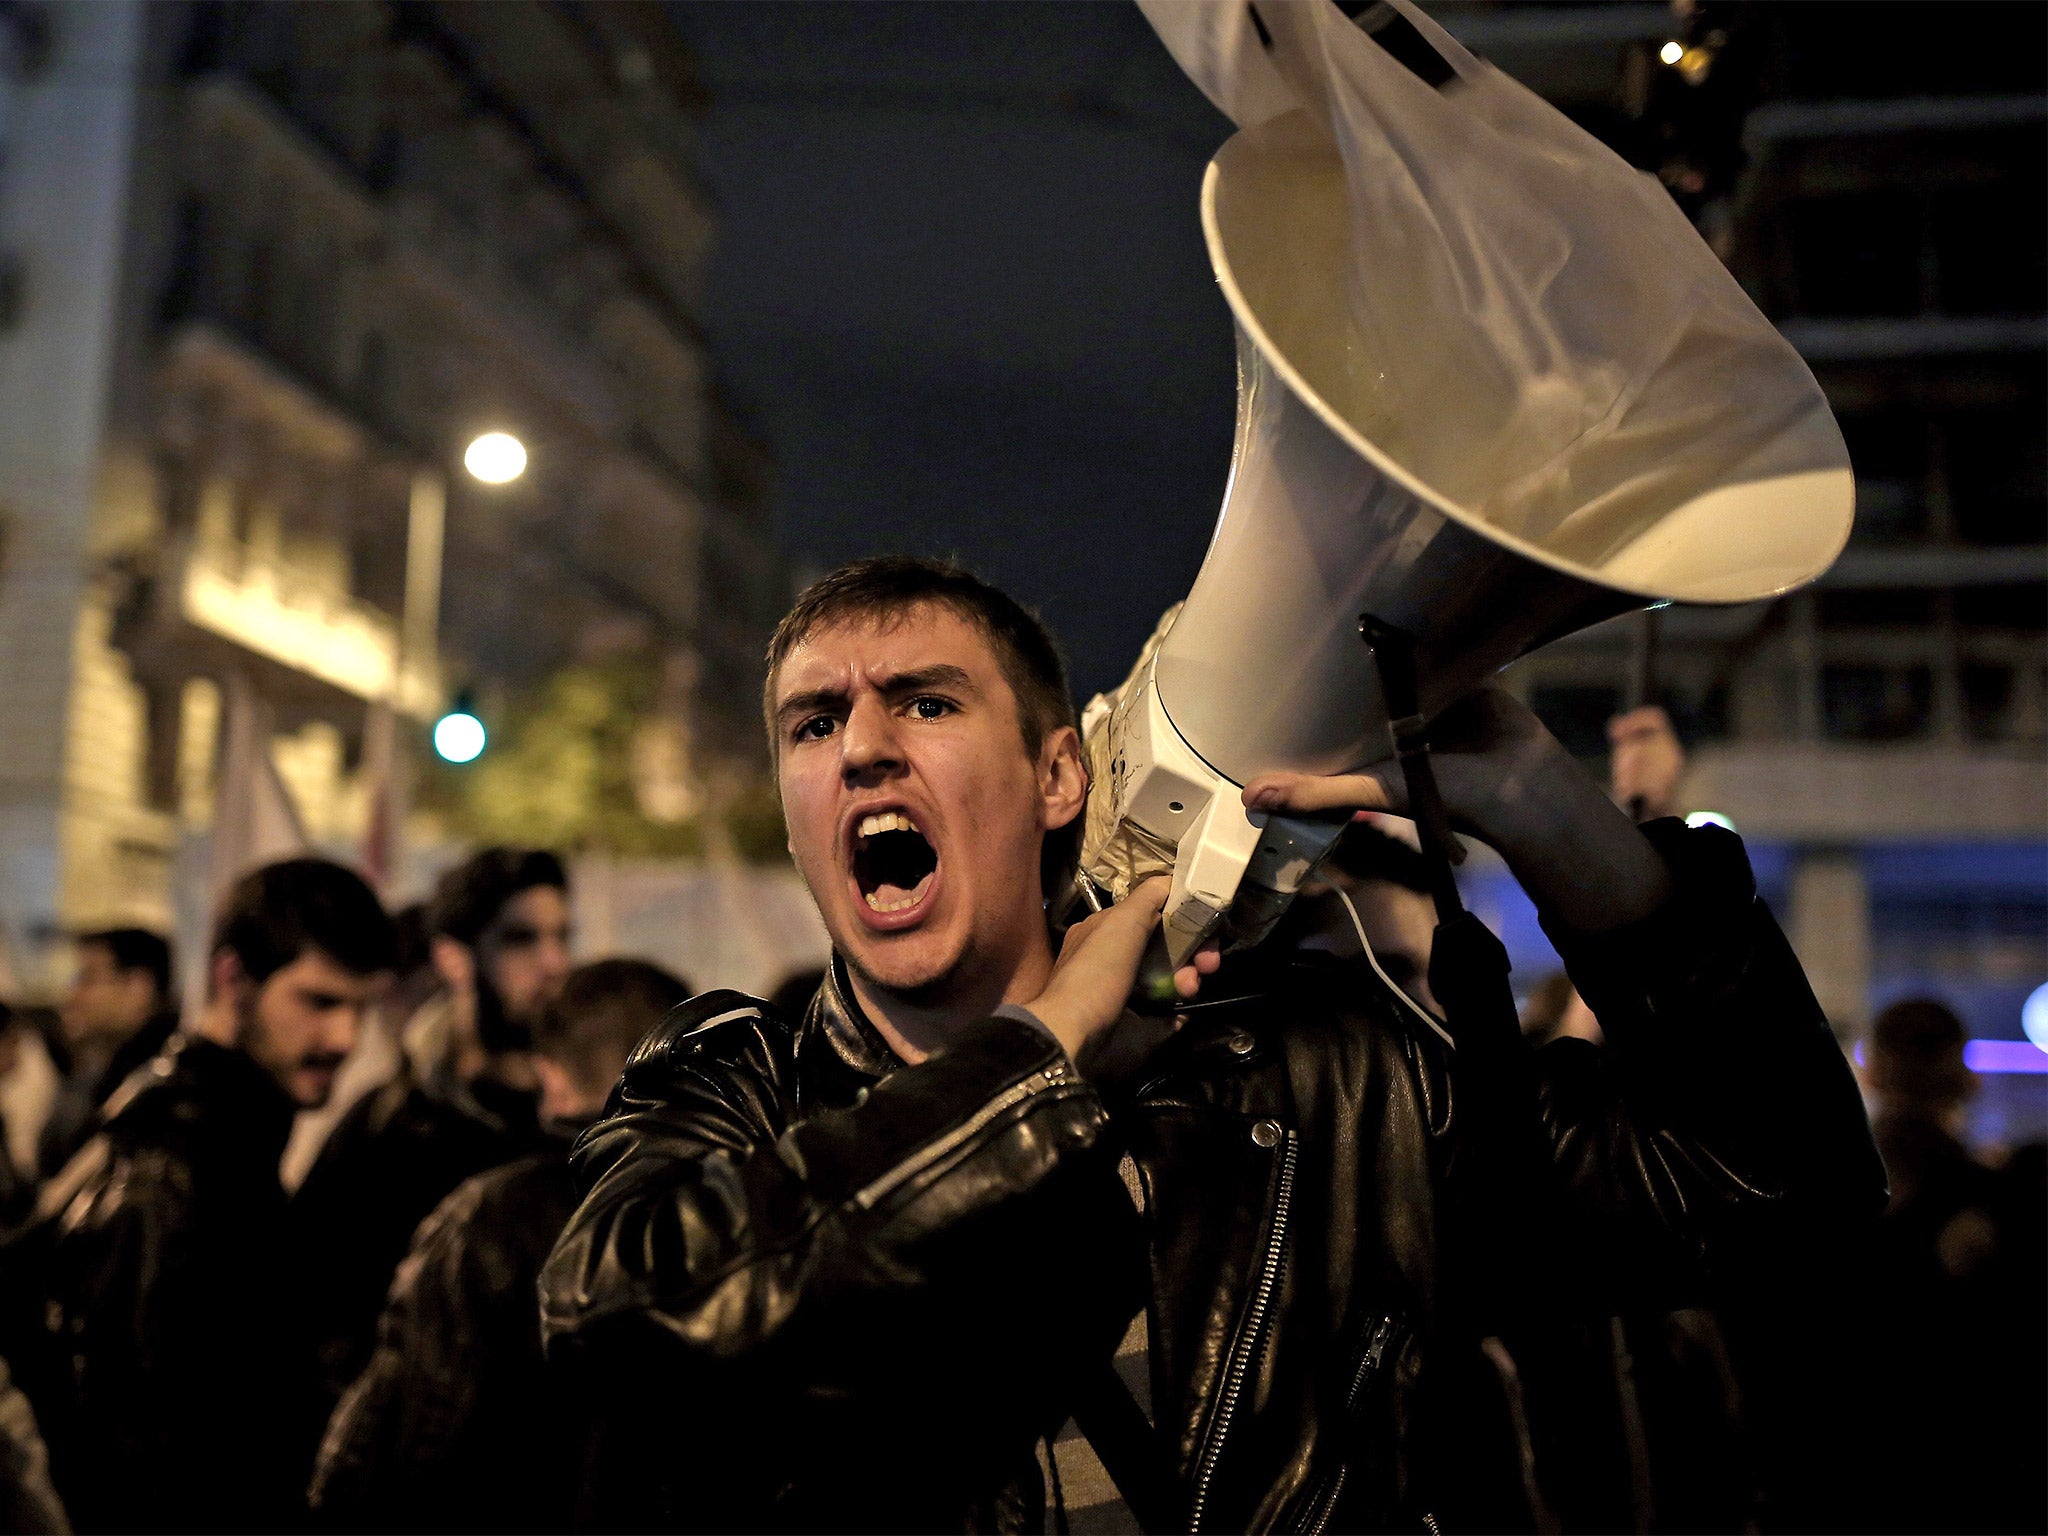 A protester shouts anti-government slogans during a demonstration outside the parliament in Athens this week, ahead of a budget vote and the end of the EU’s bailout programme this month